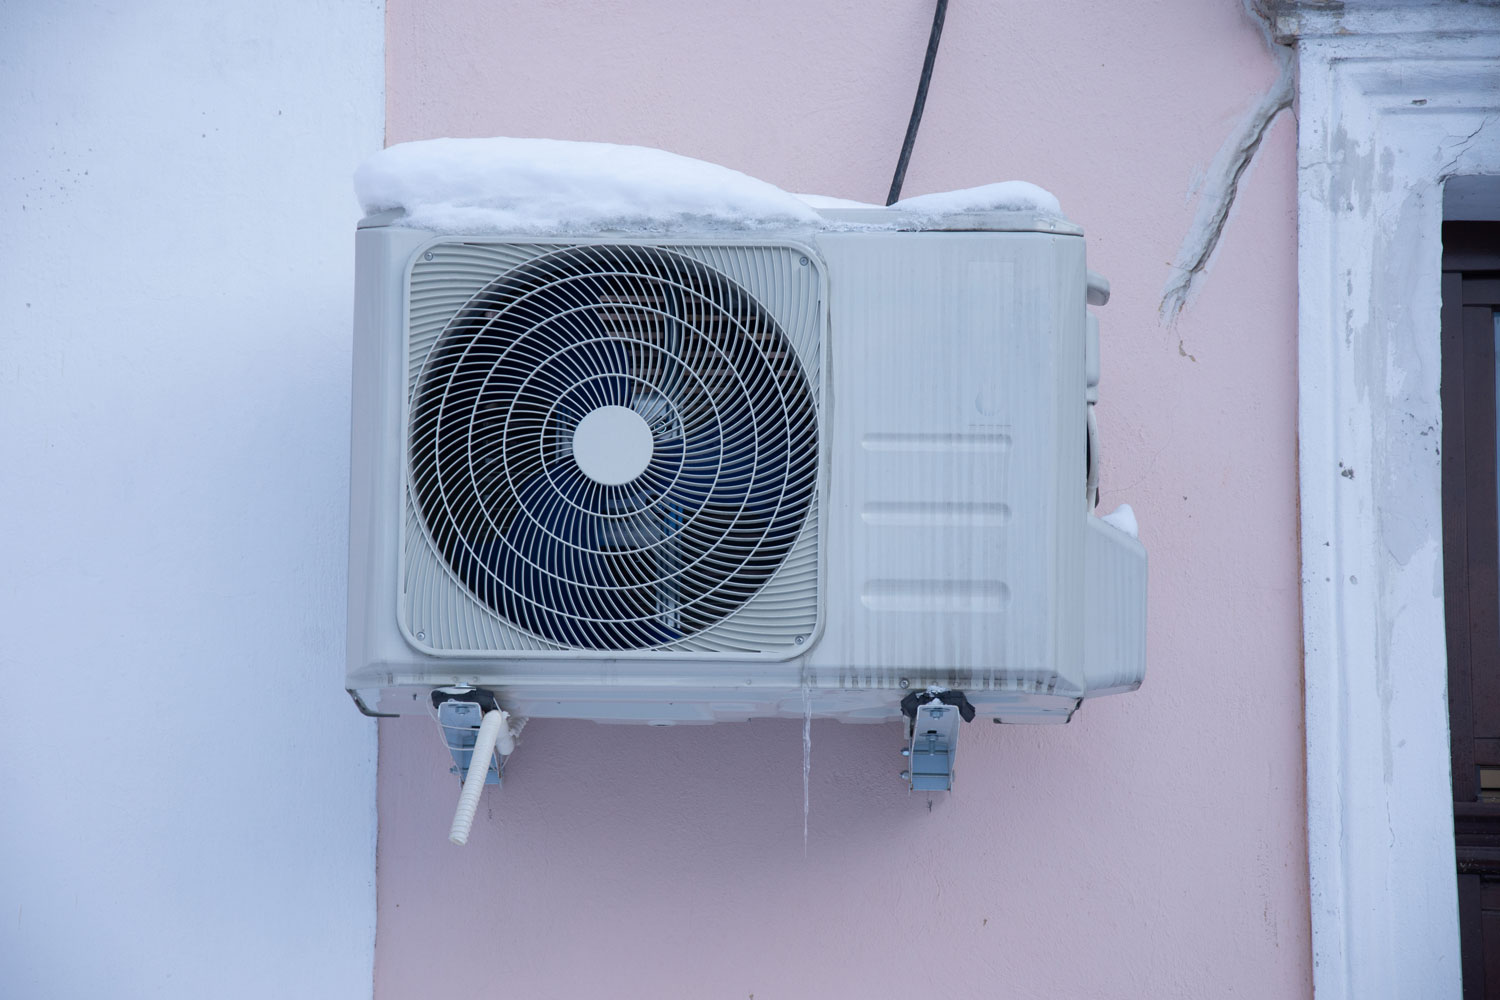 An air conditioning unit mounted on the wall outside of a house